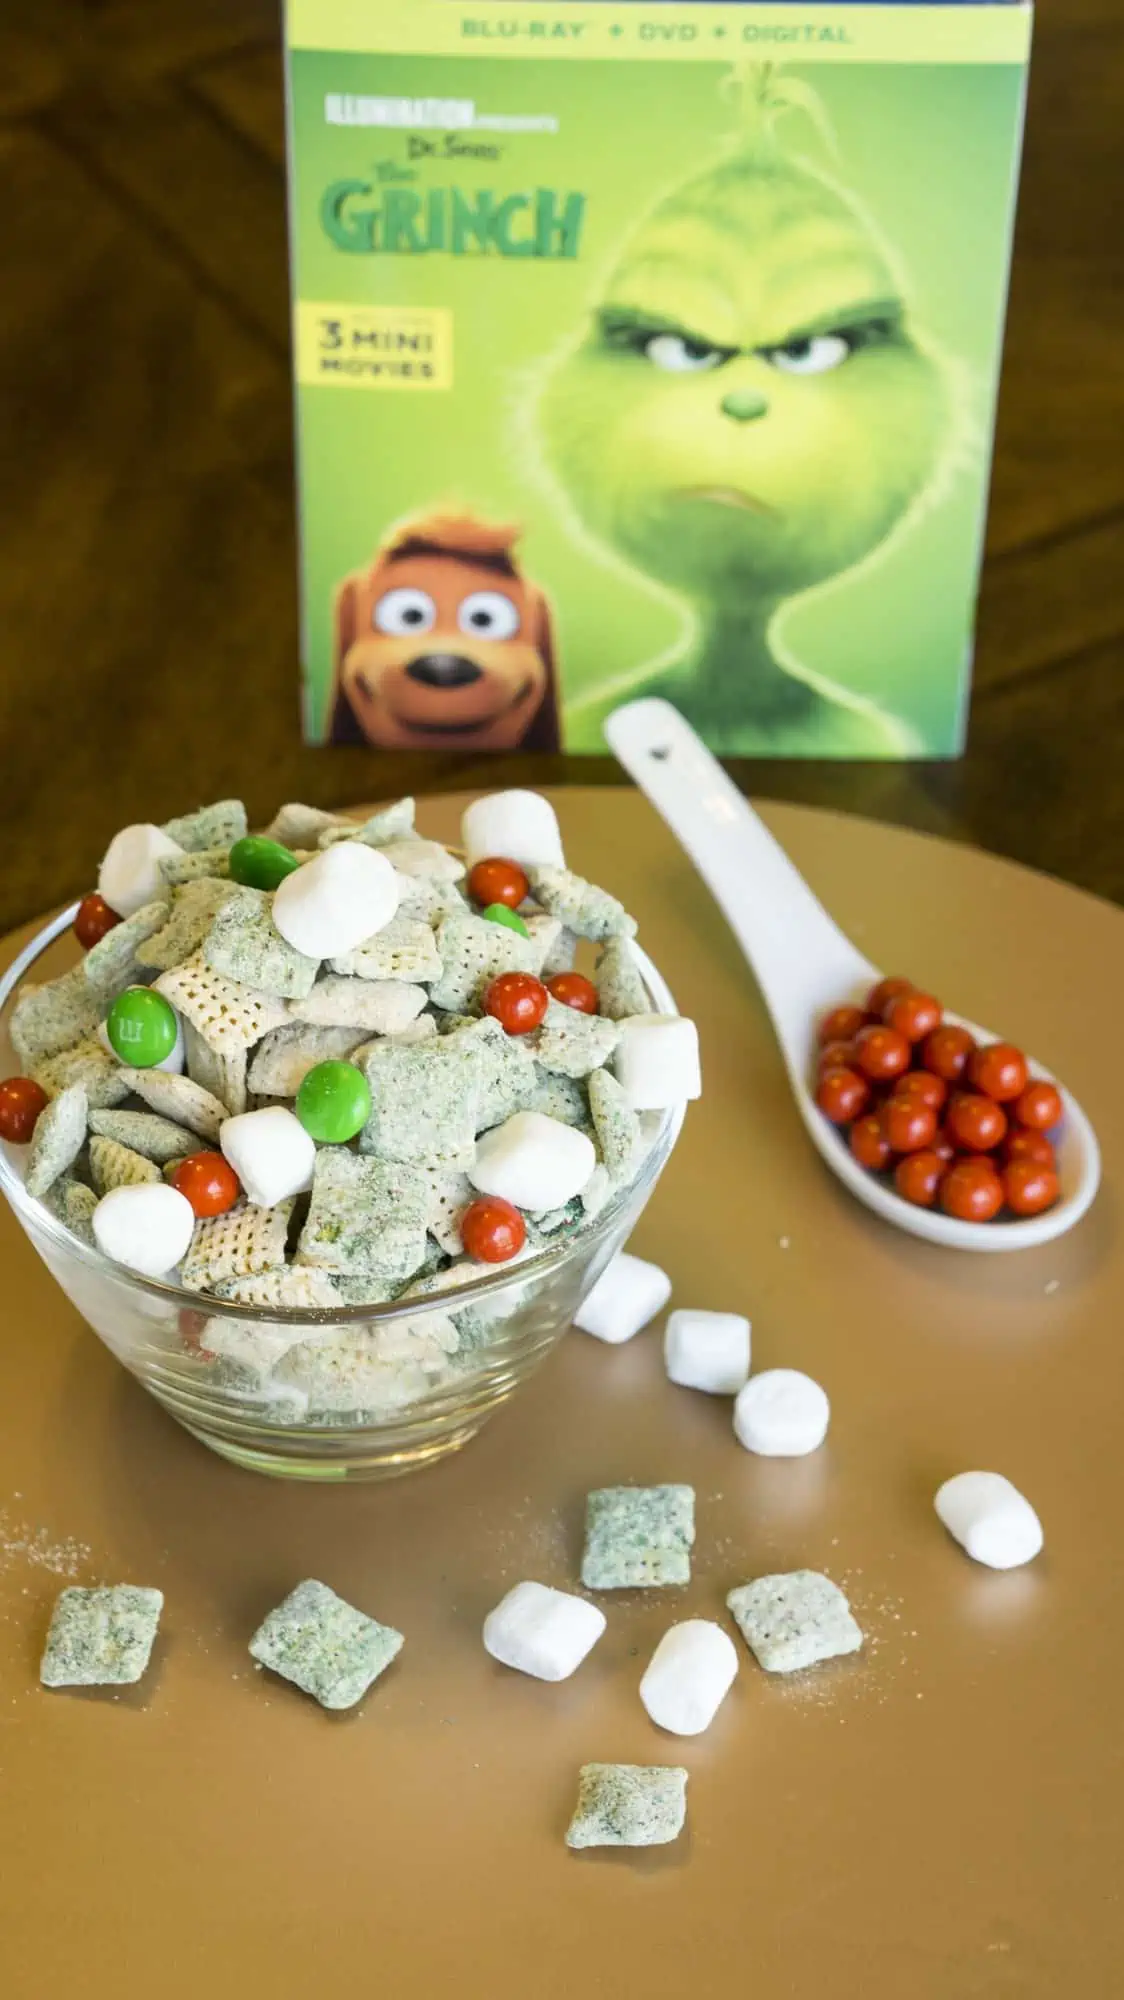 The Grinch peanut butter snack mix